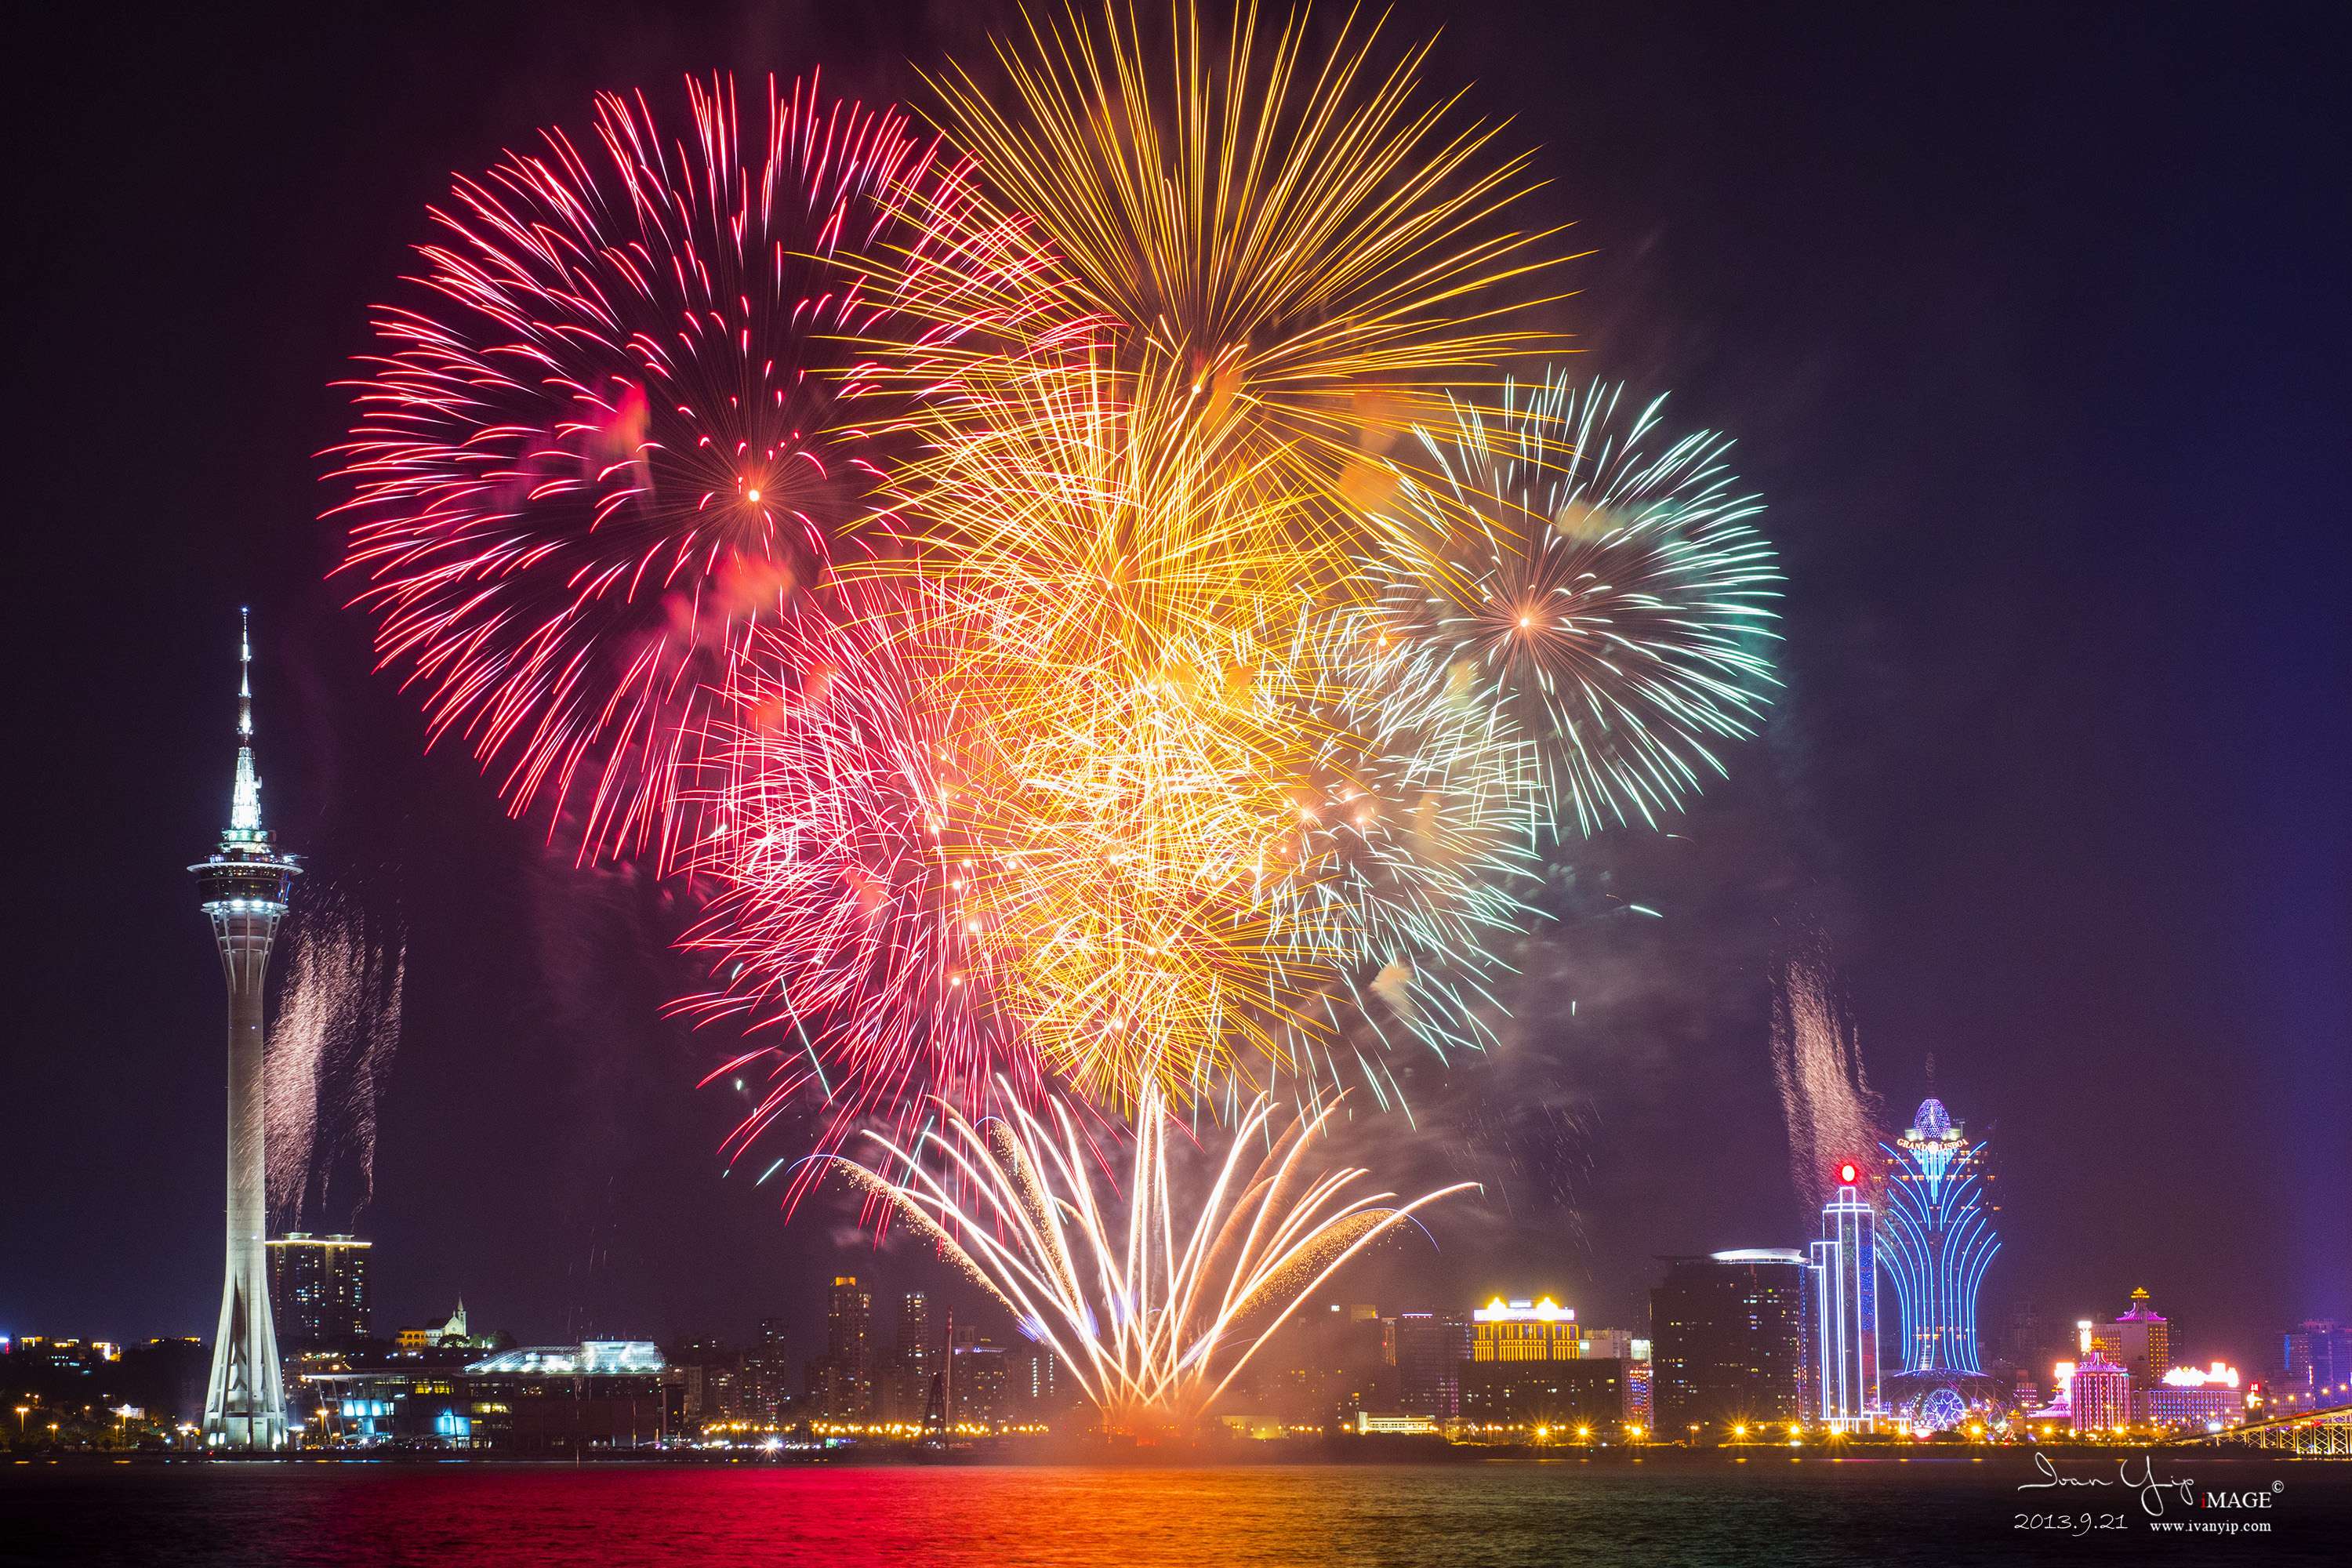 International Fireworks Display competition returns this month.